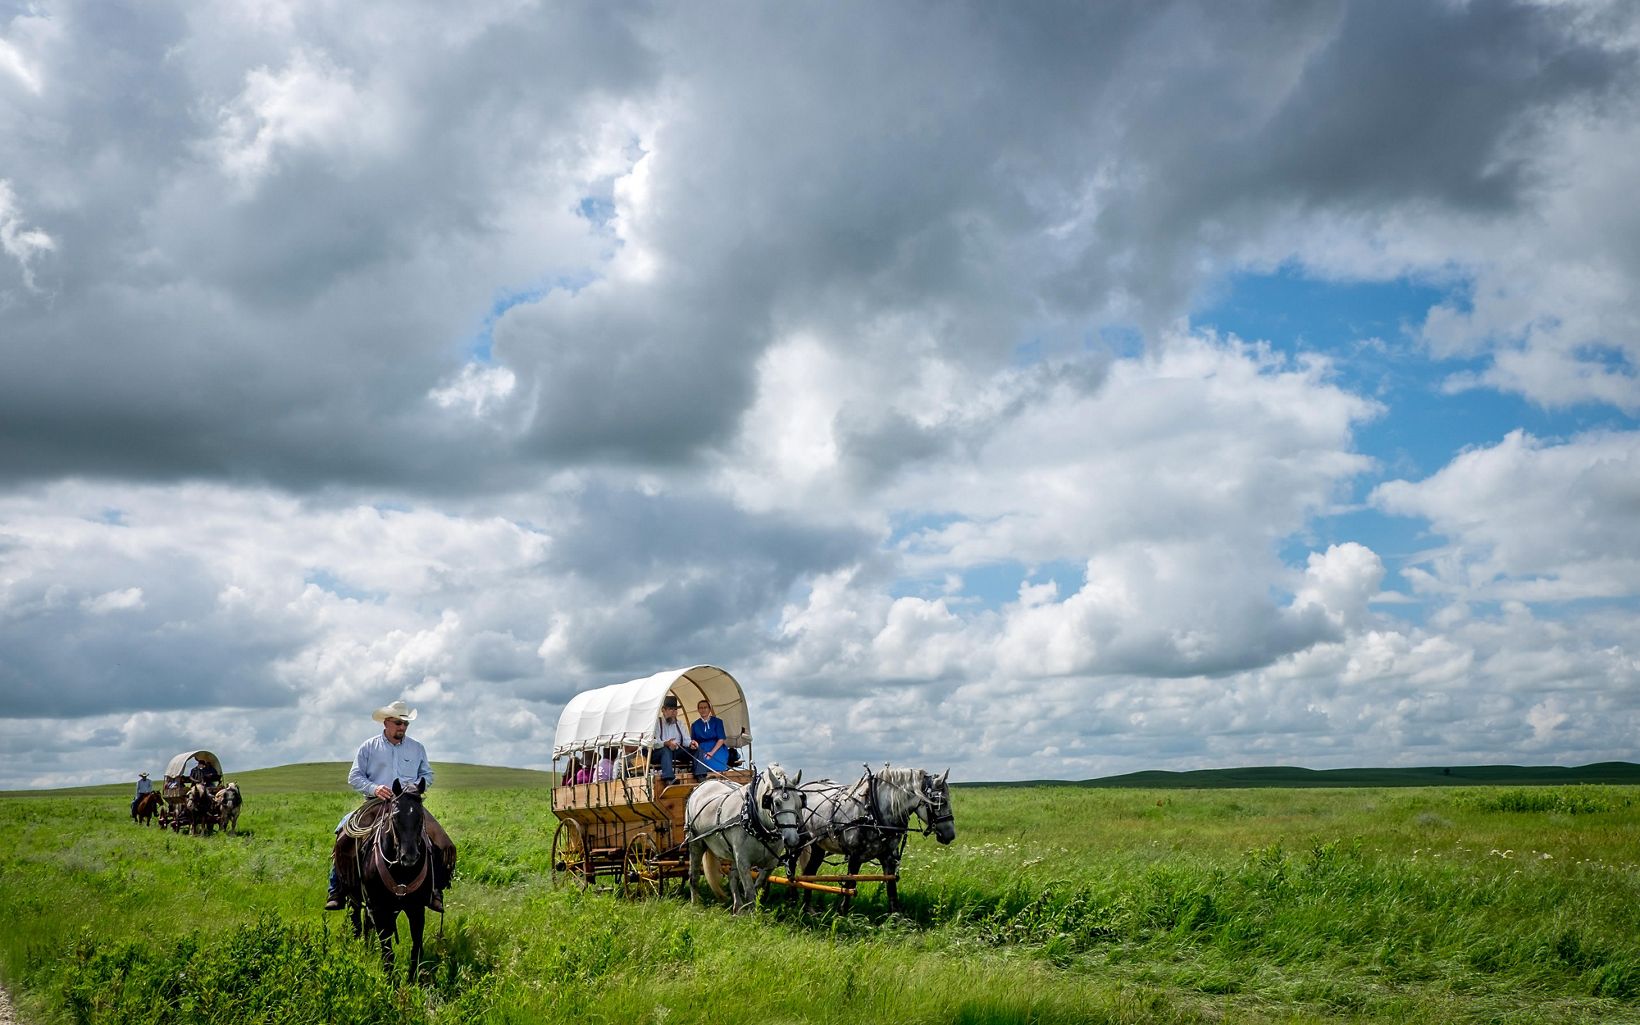 People in covered wagons pulled by horses in a vast open grassland.